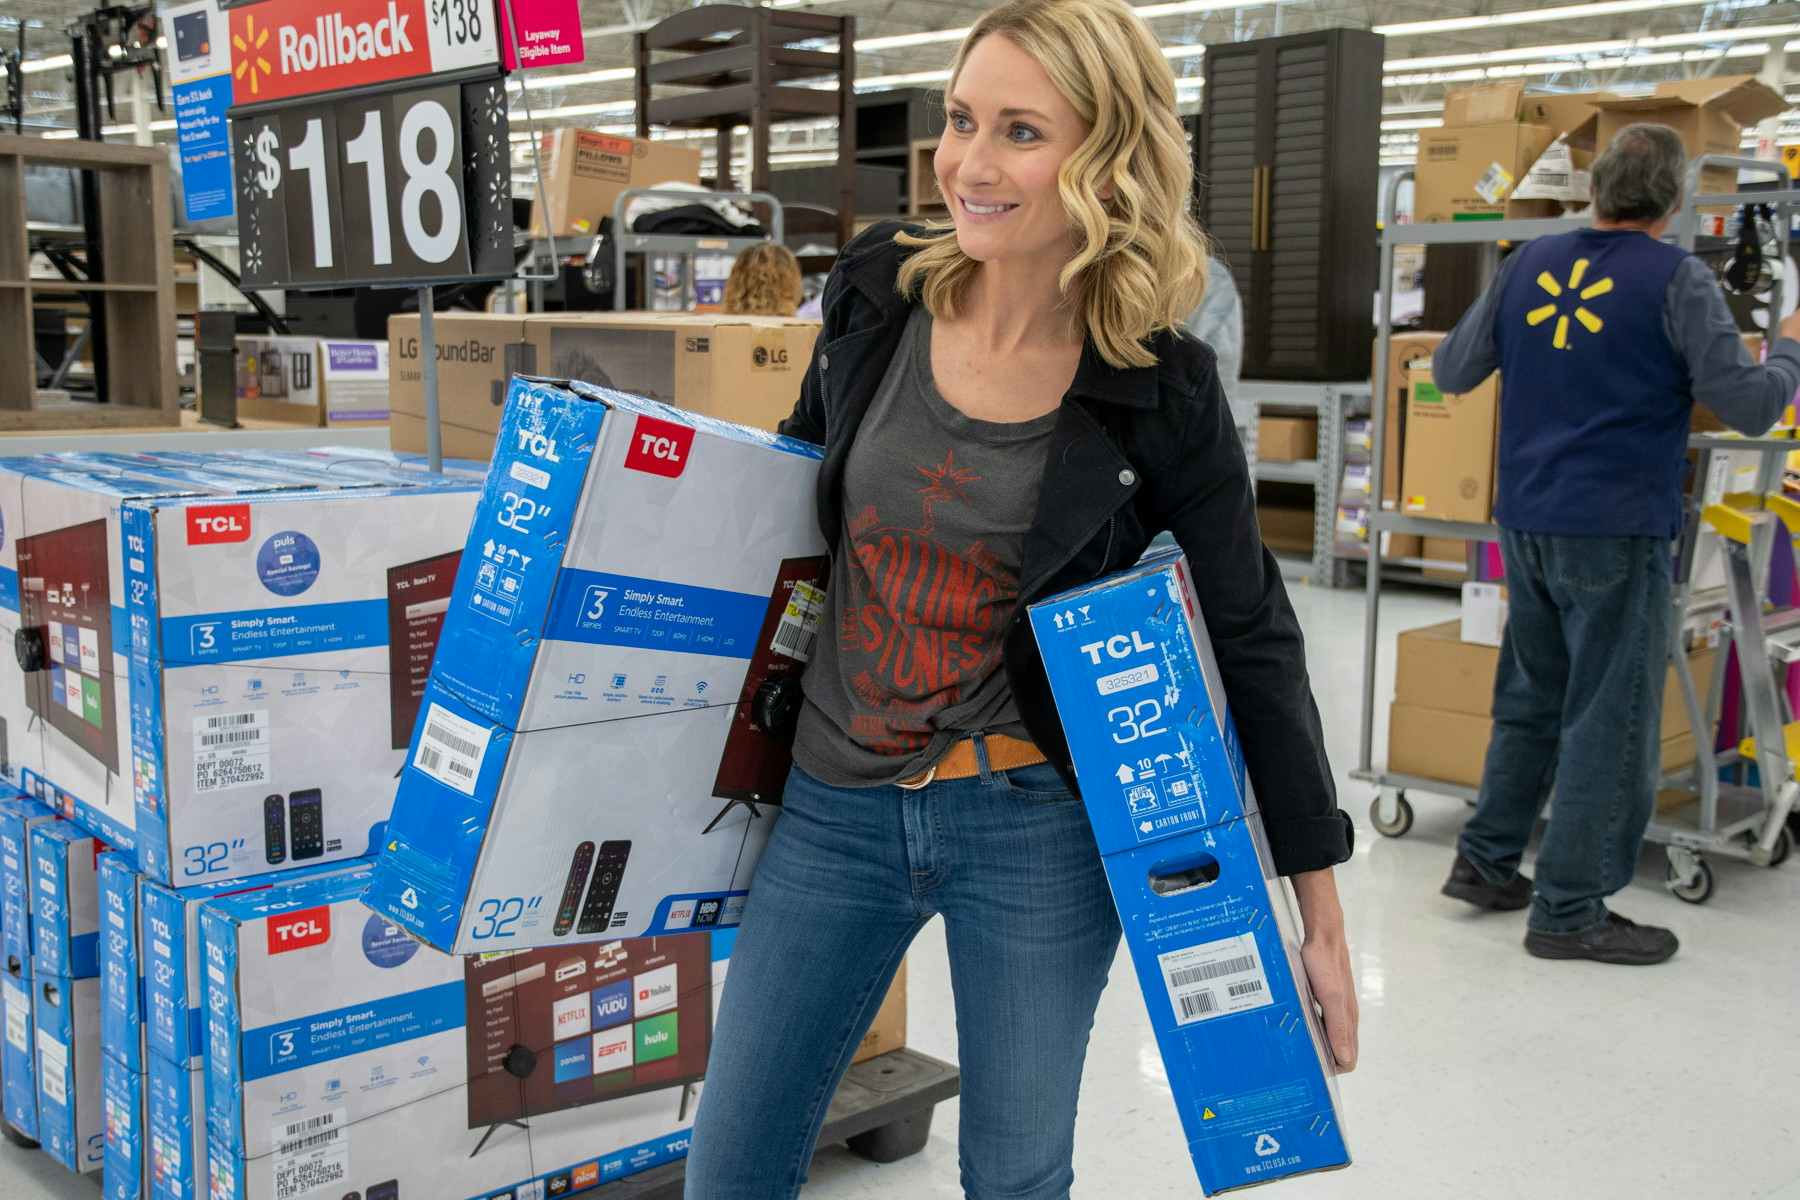 A woman with two tvs in her hand, stands in front of a display of TV's inside Walmart.